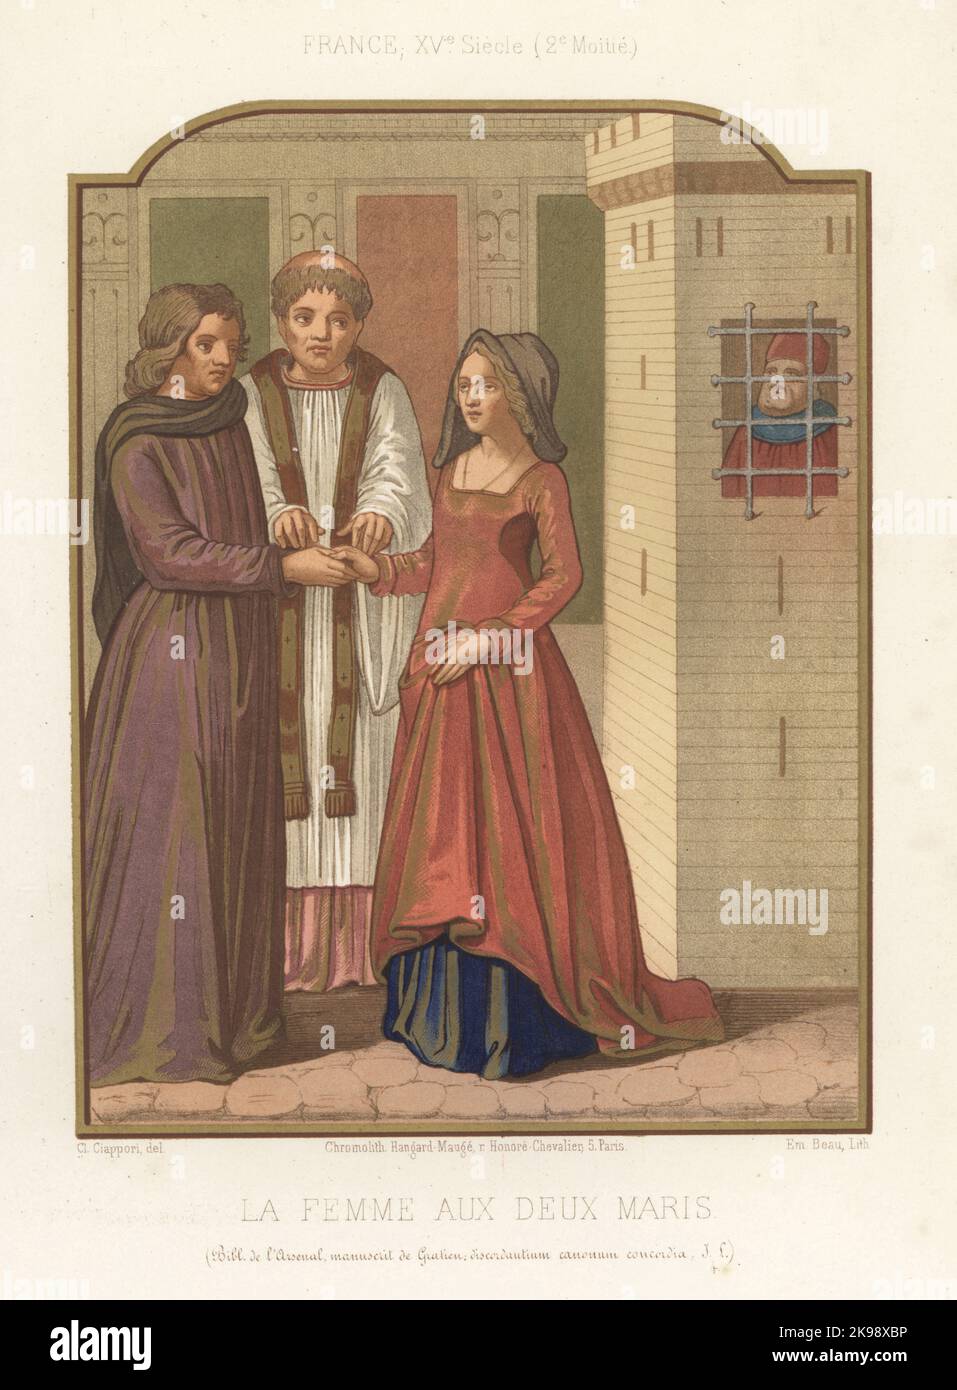 French marriage ceremony, 15th century. The bride's previous husband watches from a prison cell. La femme aux deux maris. From a miniature in Gratian's Decretum manuscript, MS JL4, Bibliotheque de l'Arsenal. Chromolithograph by Emile Beau after an illustration by Claudius Joseph Ciappori from Charles Louandre’s Les Arts Somptuaires, The Sumptuary Arts, Hangard-Mauge, Paris, 1858. Stock Photo